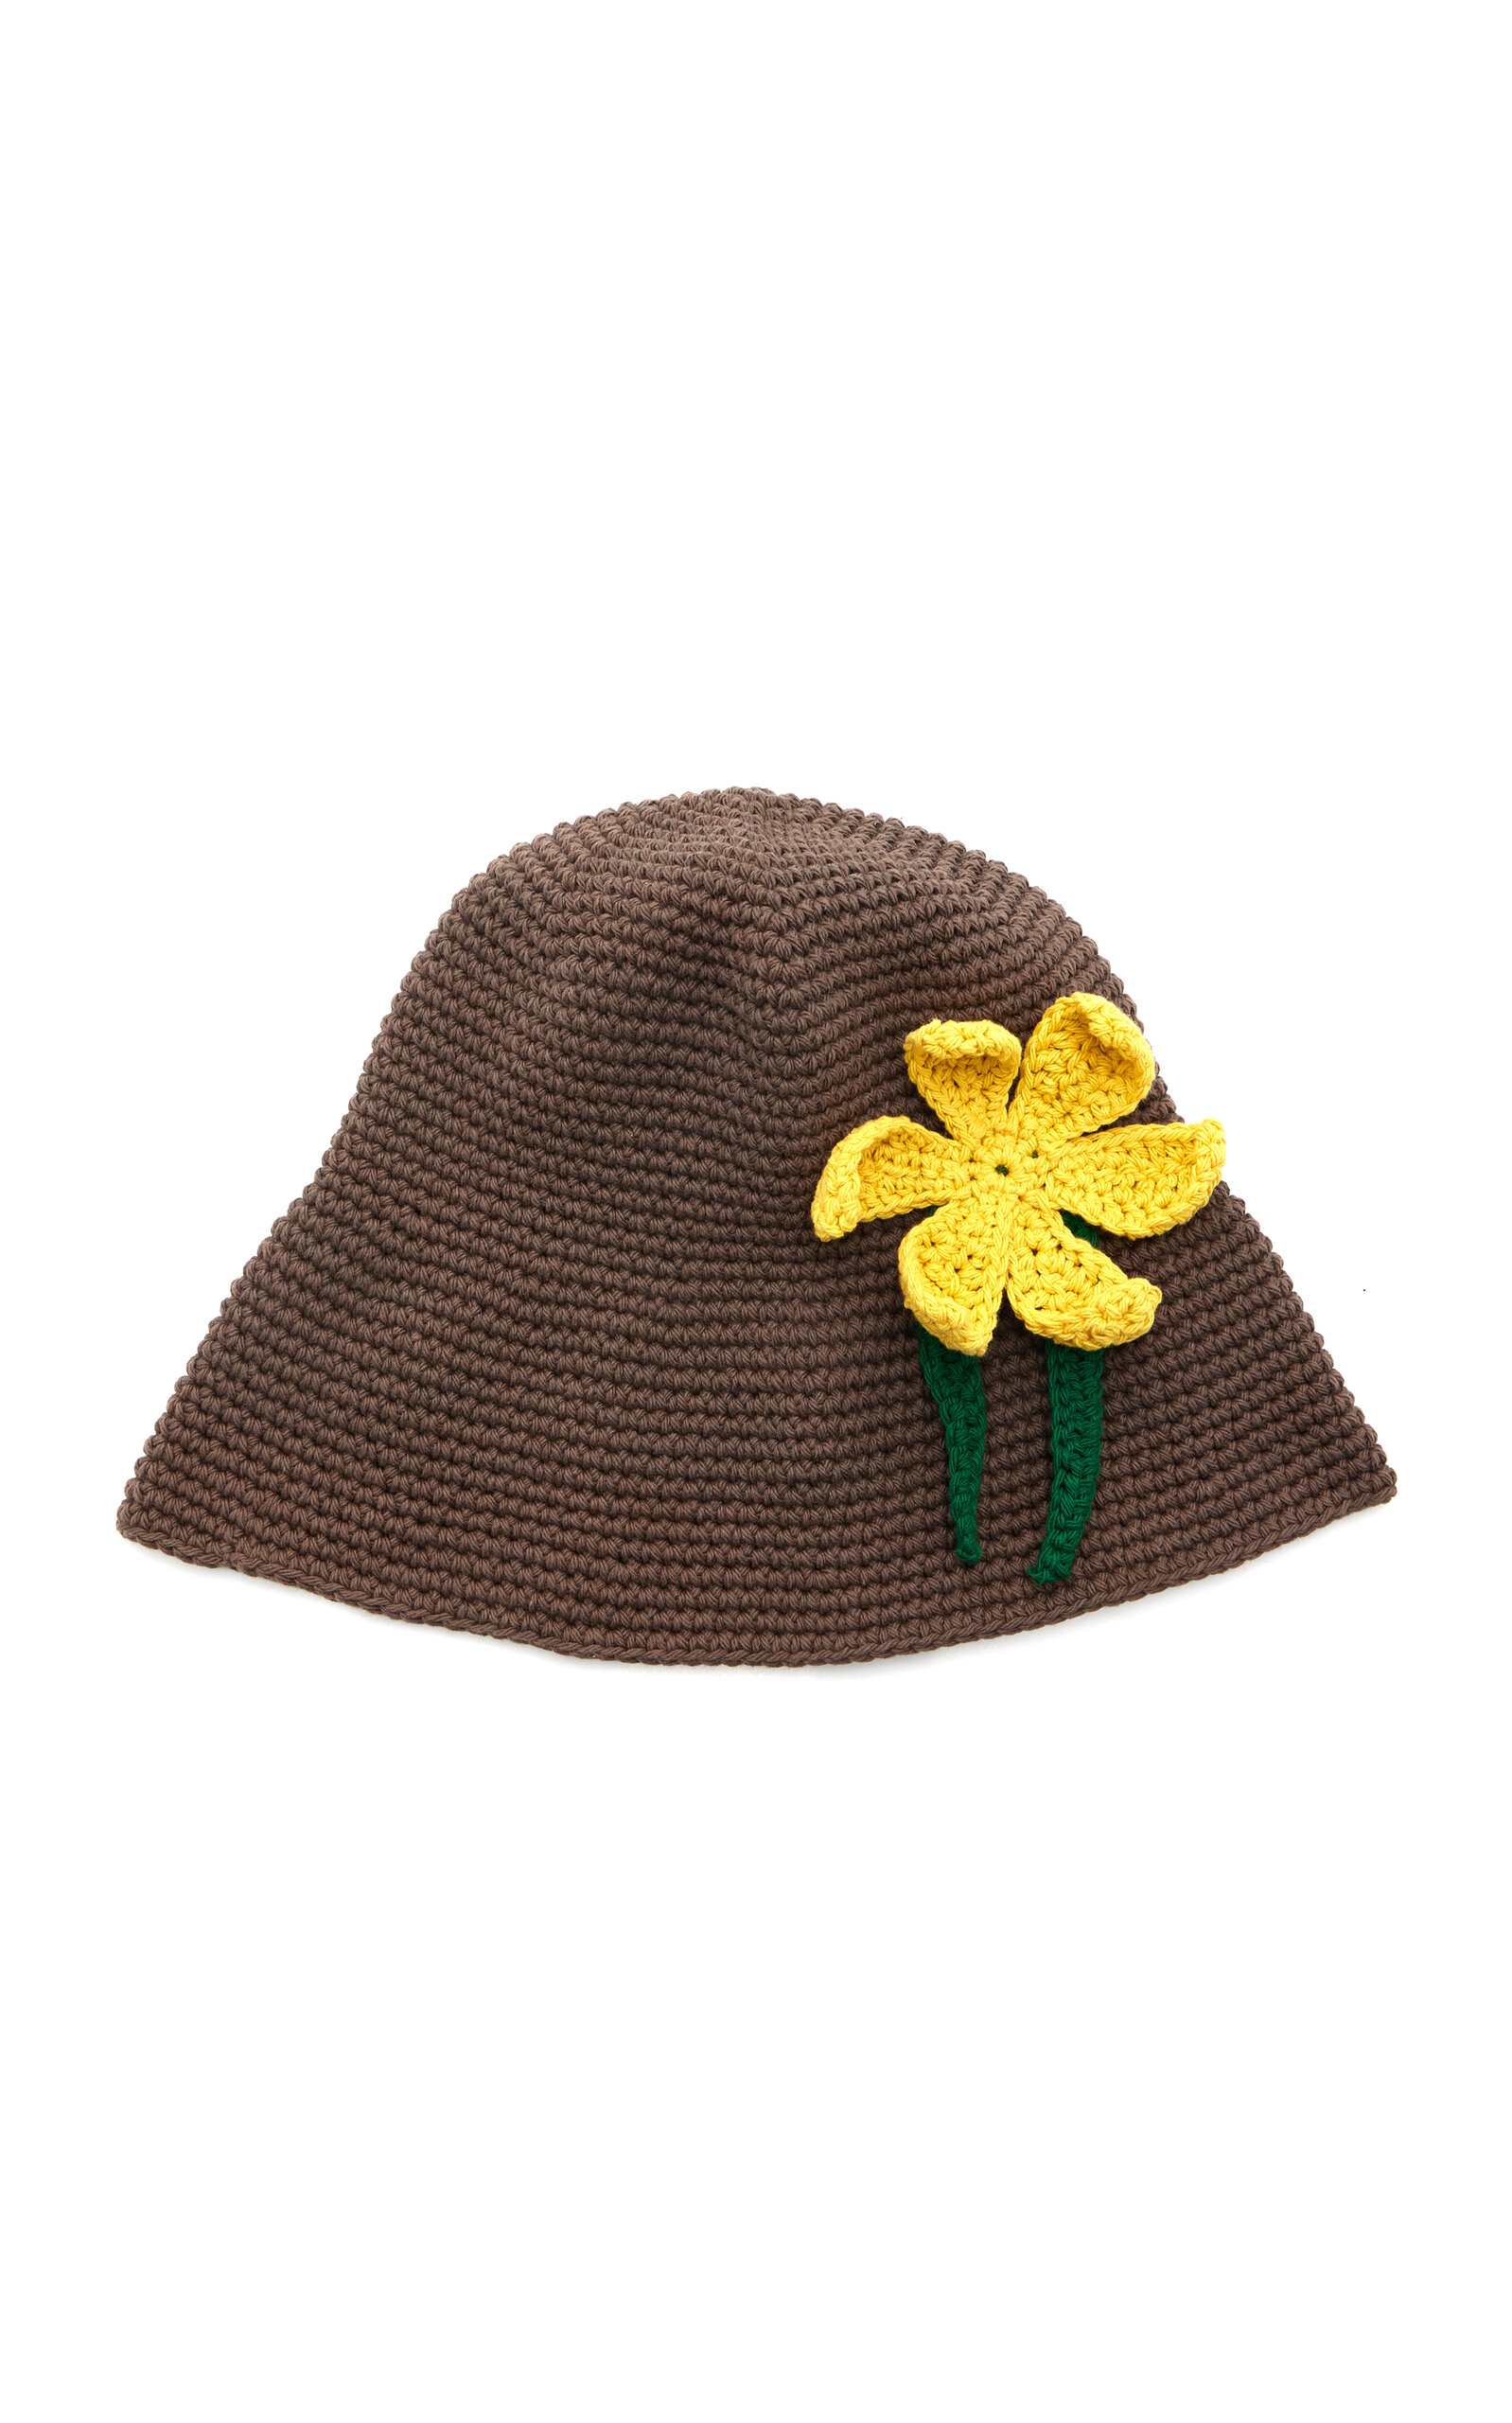 Exclusive Floral-Embellished Crocheted-Cotton Bucket Hat